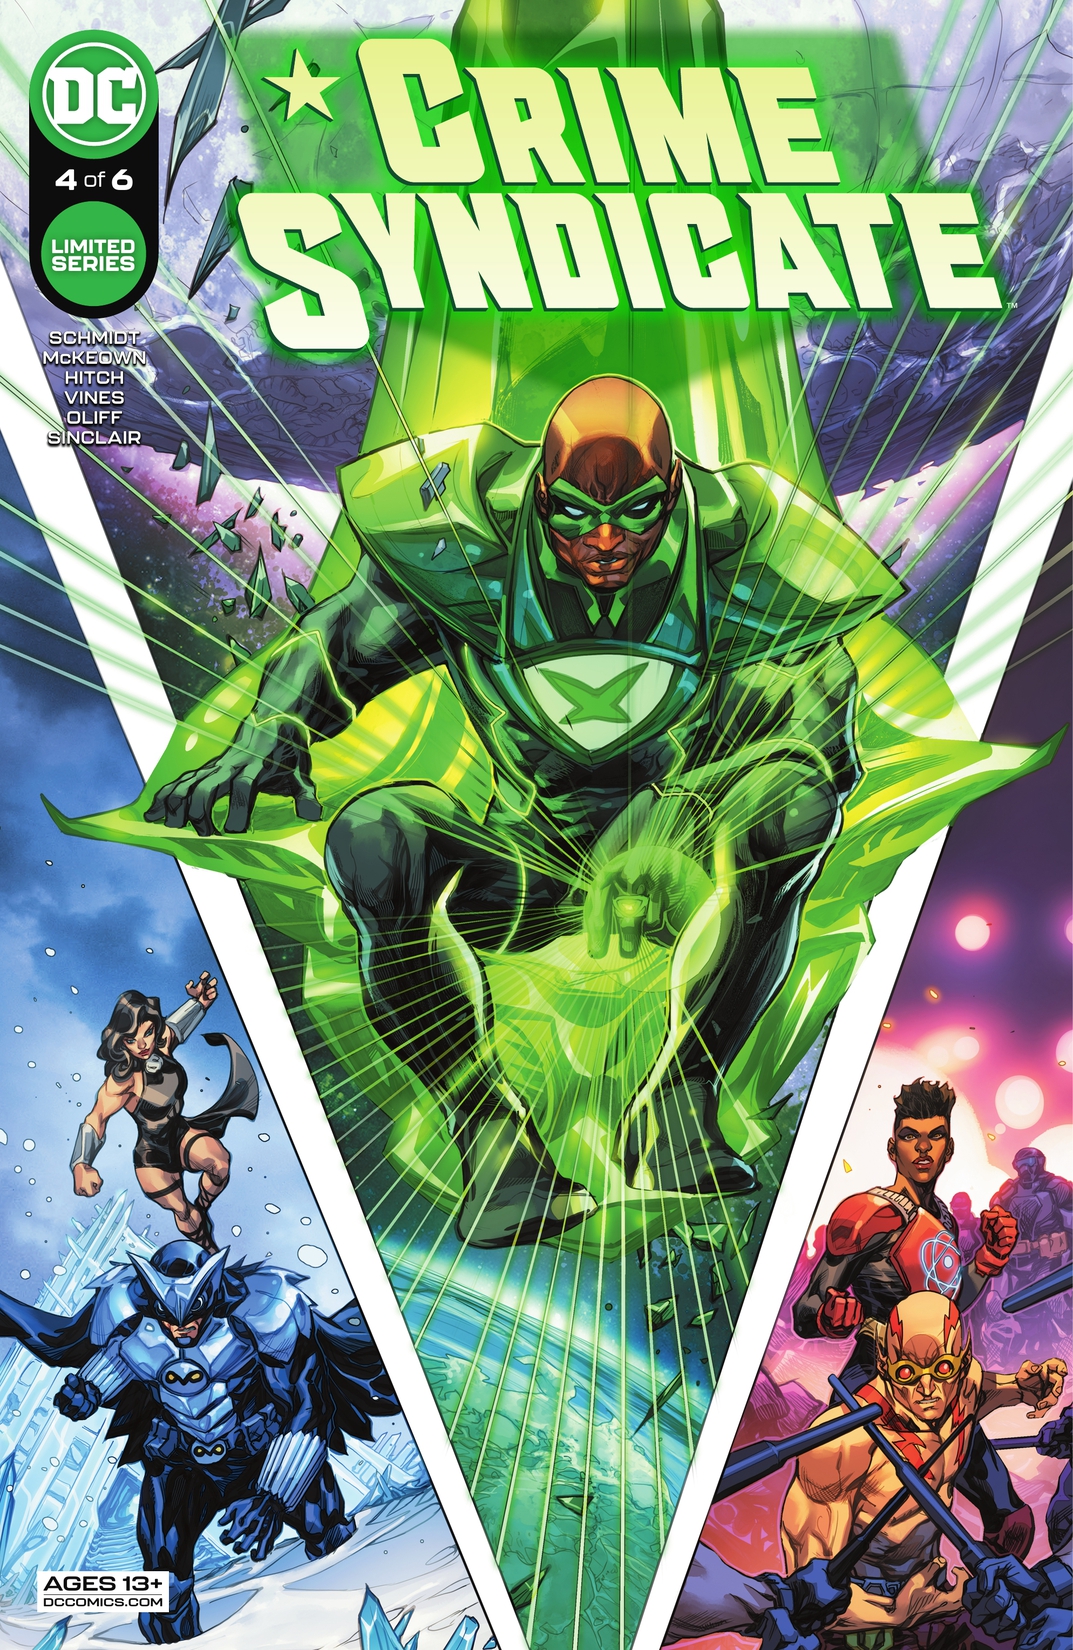 Crime Syndicate #4 preview images